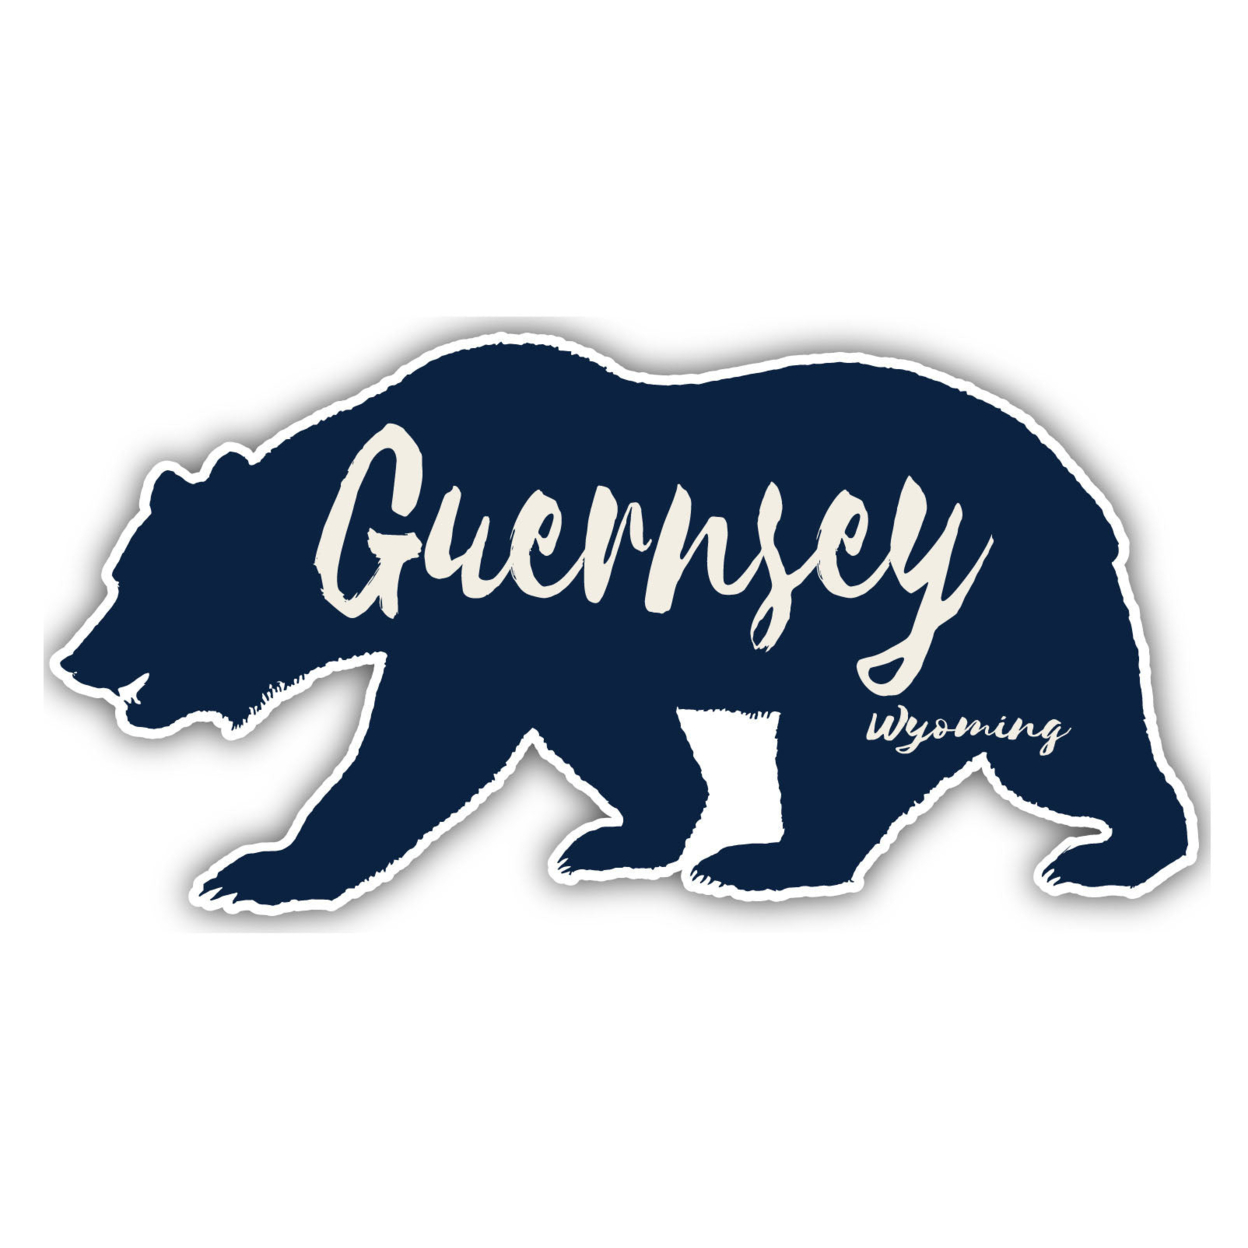 Guernsey Wyoming Souvenir Decorative Stickers (Choose Theme And Size) - Single Unit, 12-Inch, Bear